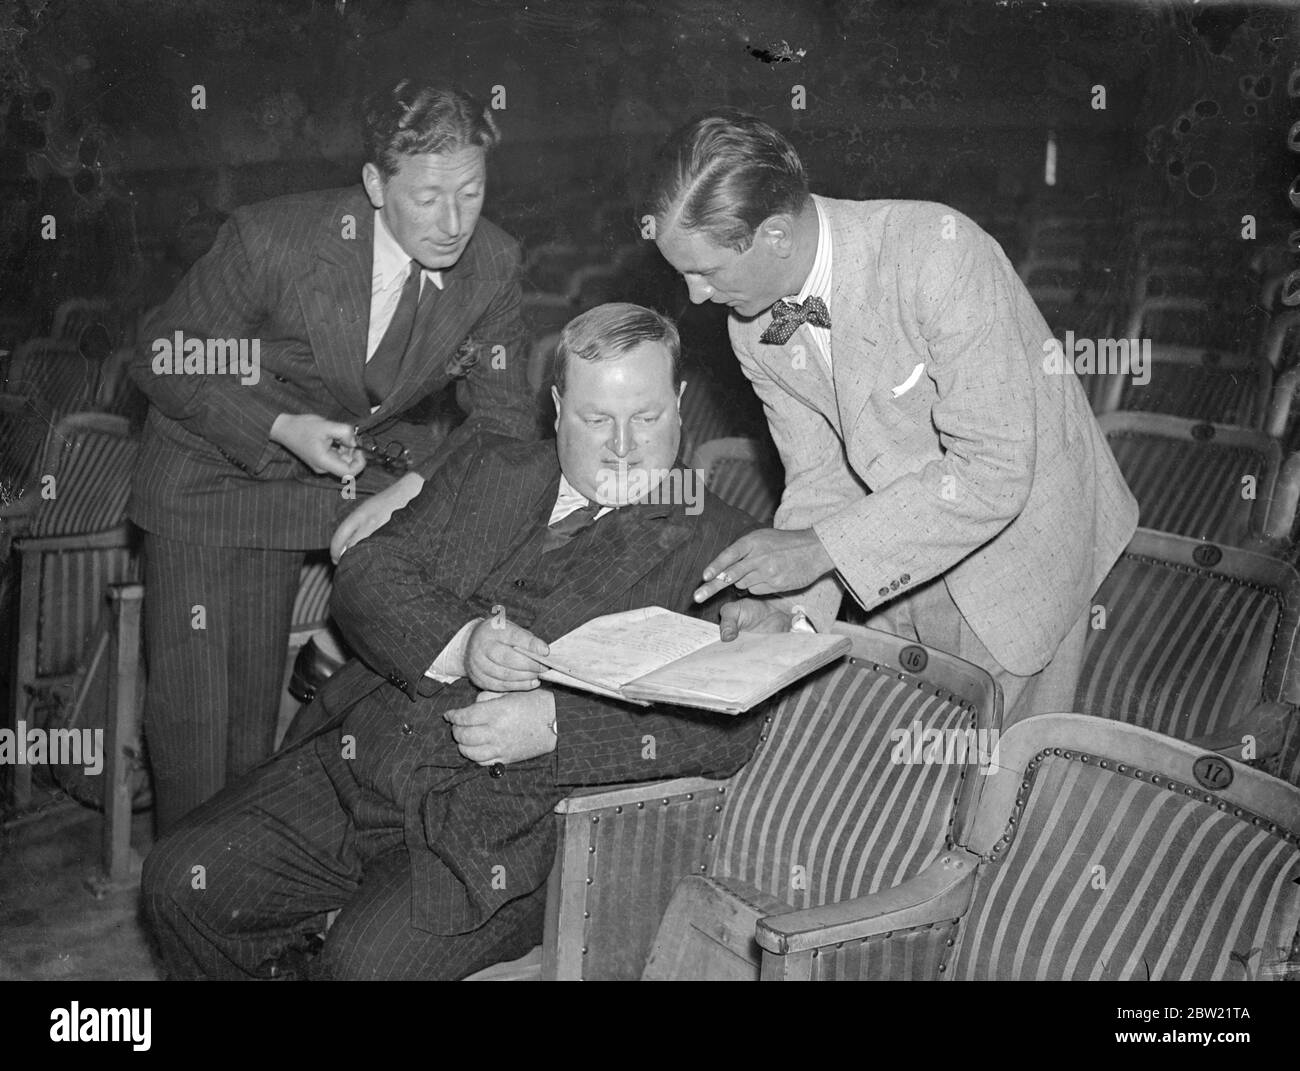 The Earl of Longford (centre) going over the script of Camilla with Peter Powell, the producer (right) and Henry fine, the manager of the Westminster Theatre. The play will open September 9 at the start of the season of new Irish plays performed by Lord Longford's company from the doubling gate theatre. 4 September 1937. Stock Photo